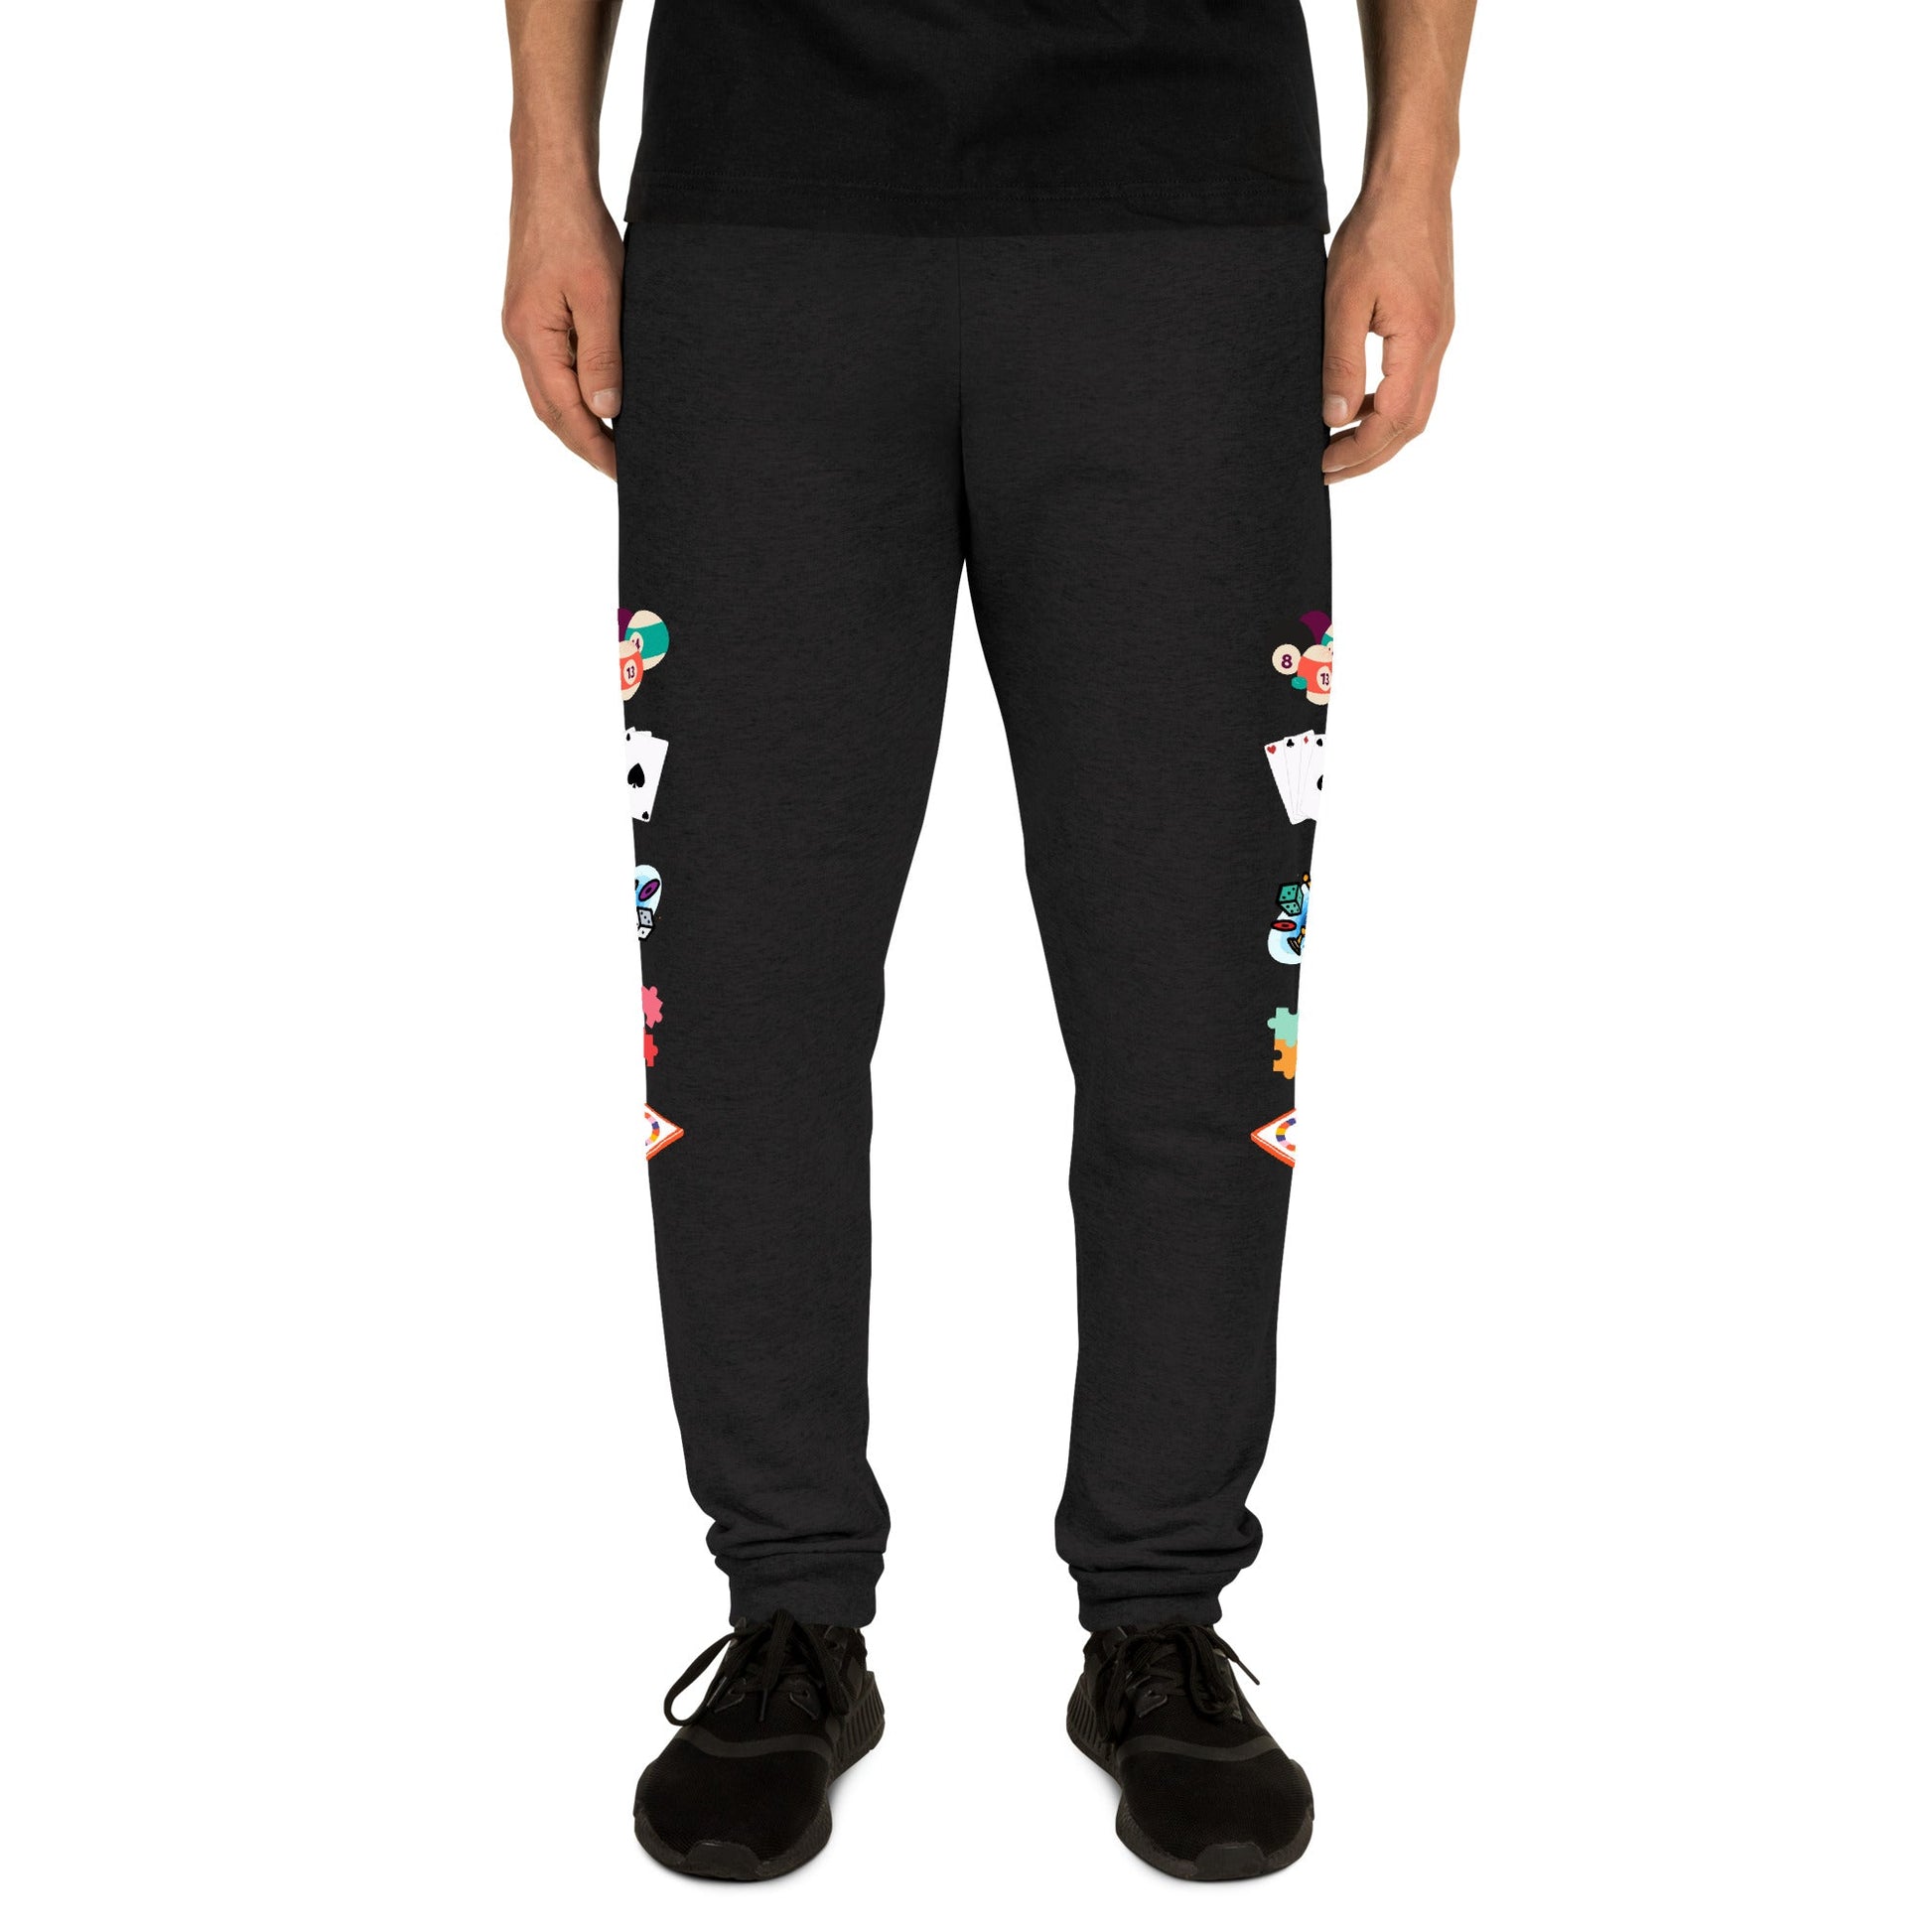 Games Games Games | Unisex Joggers